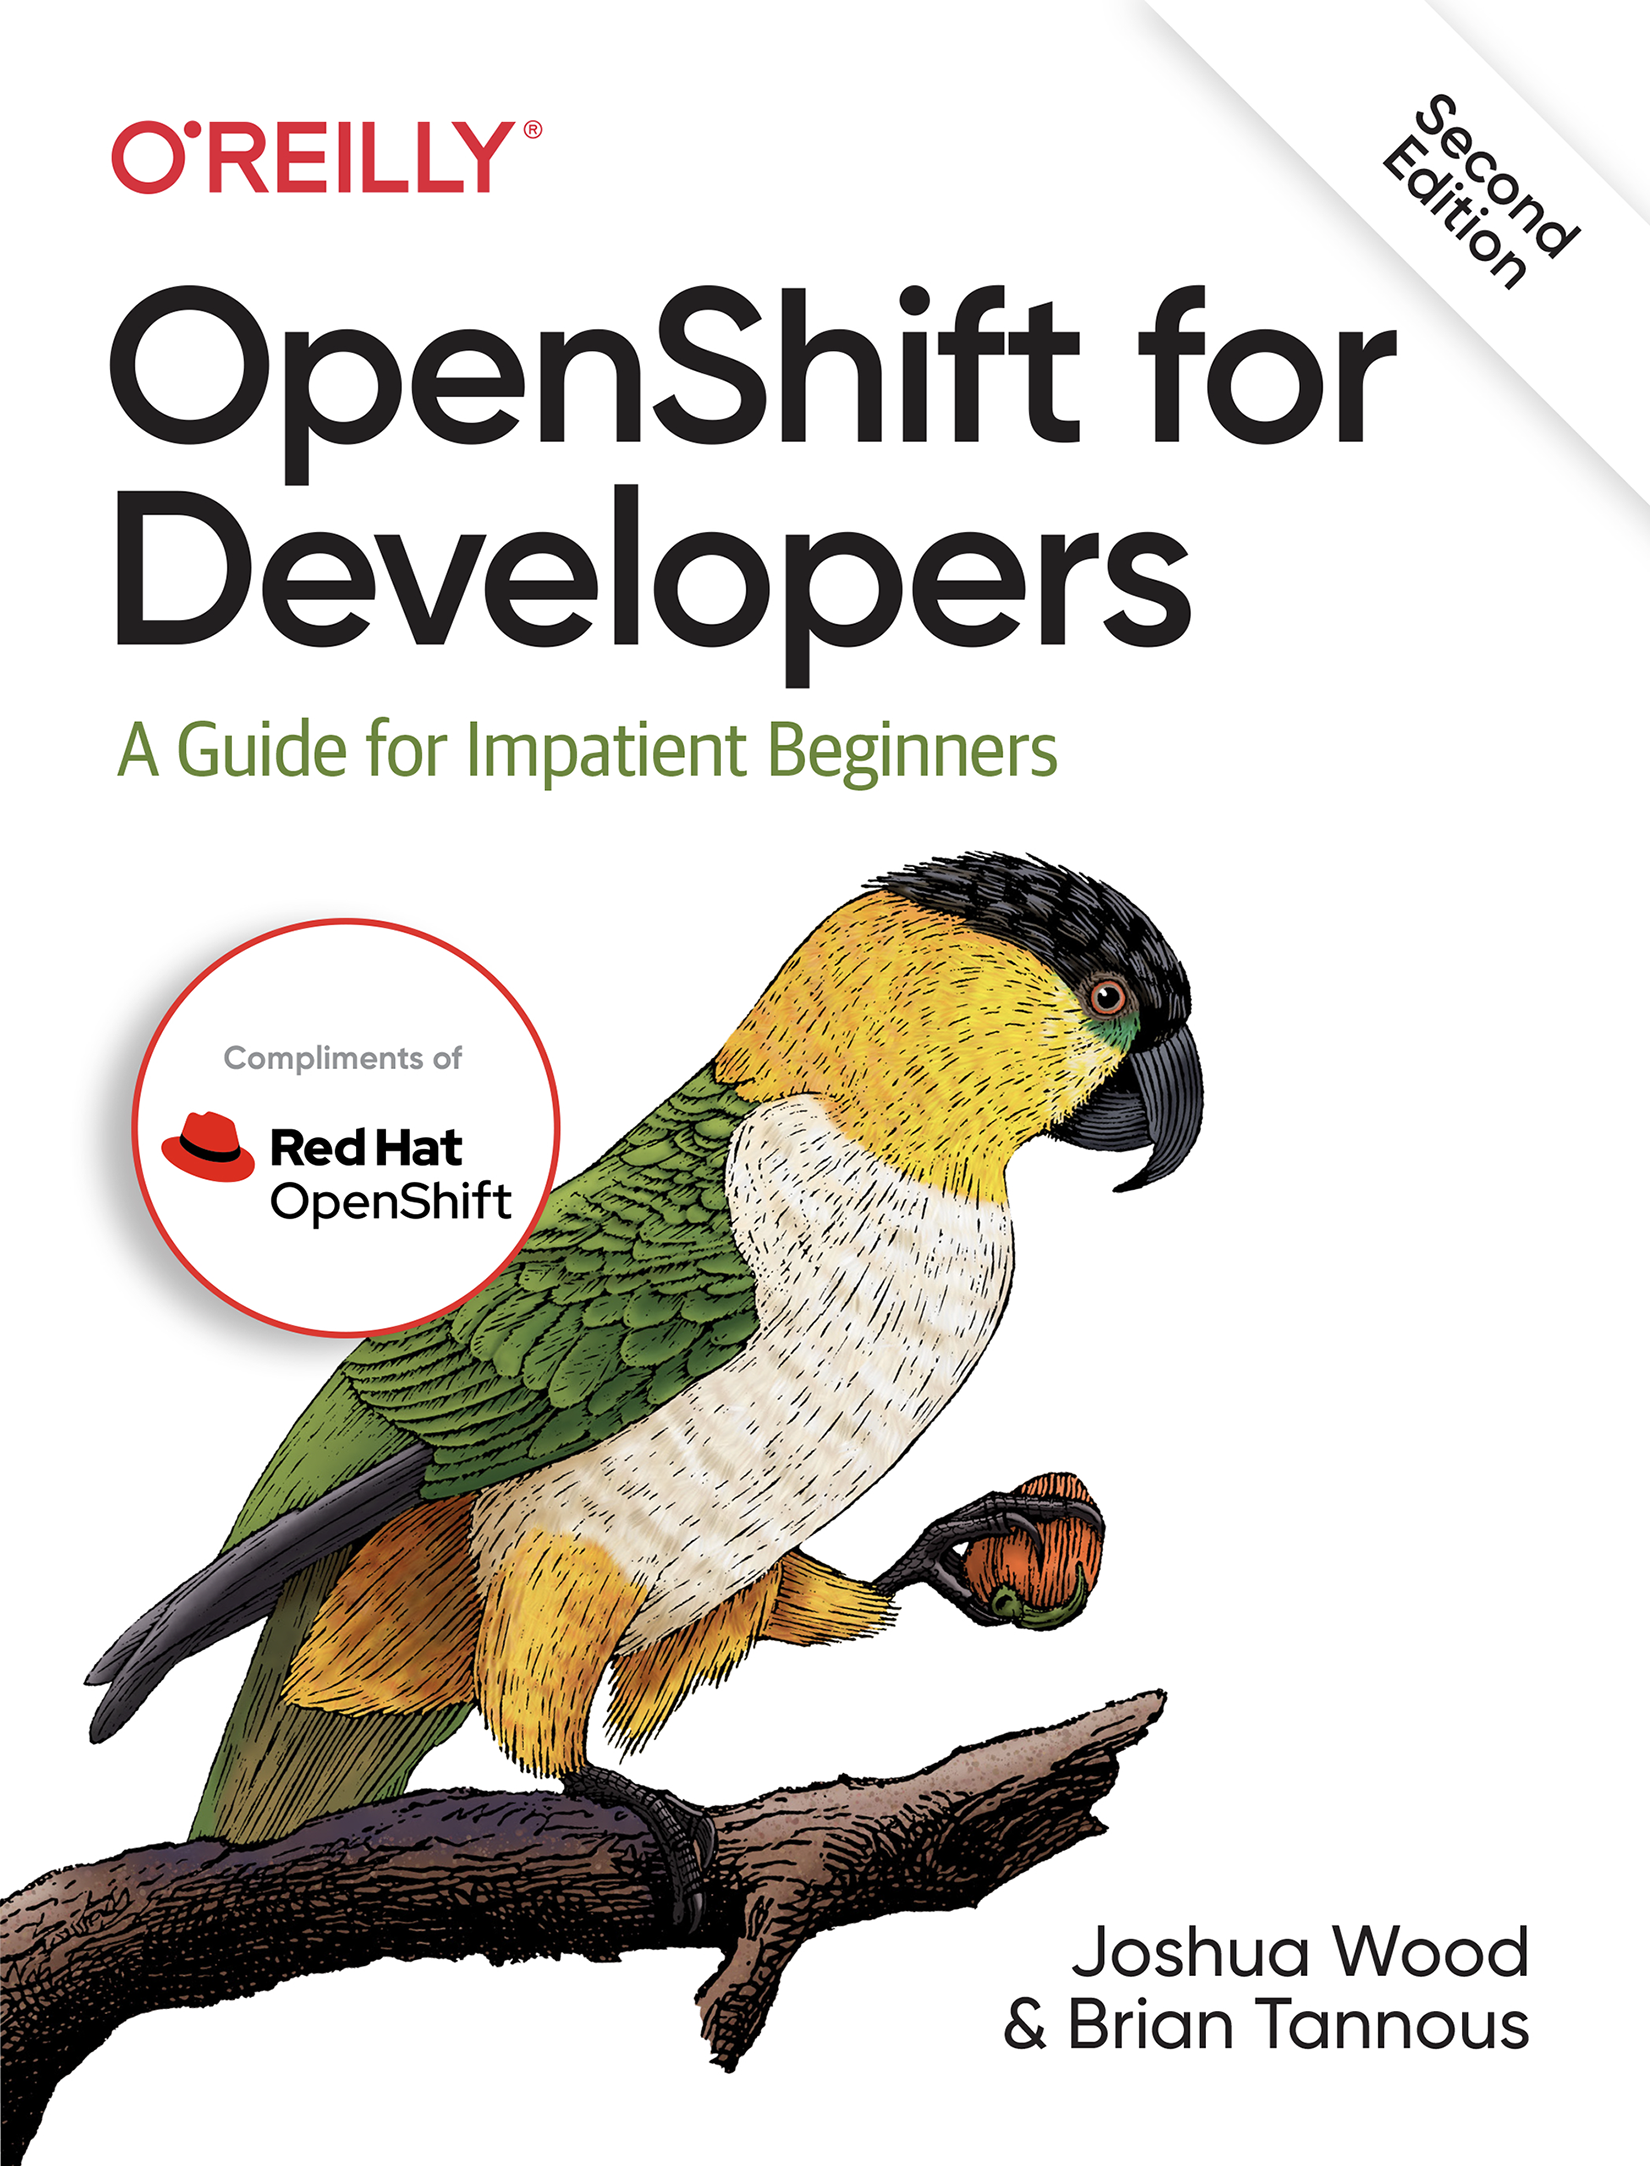 Red Hat UBI book cover